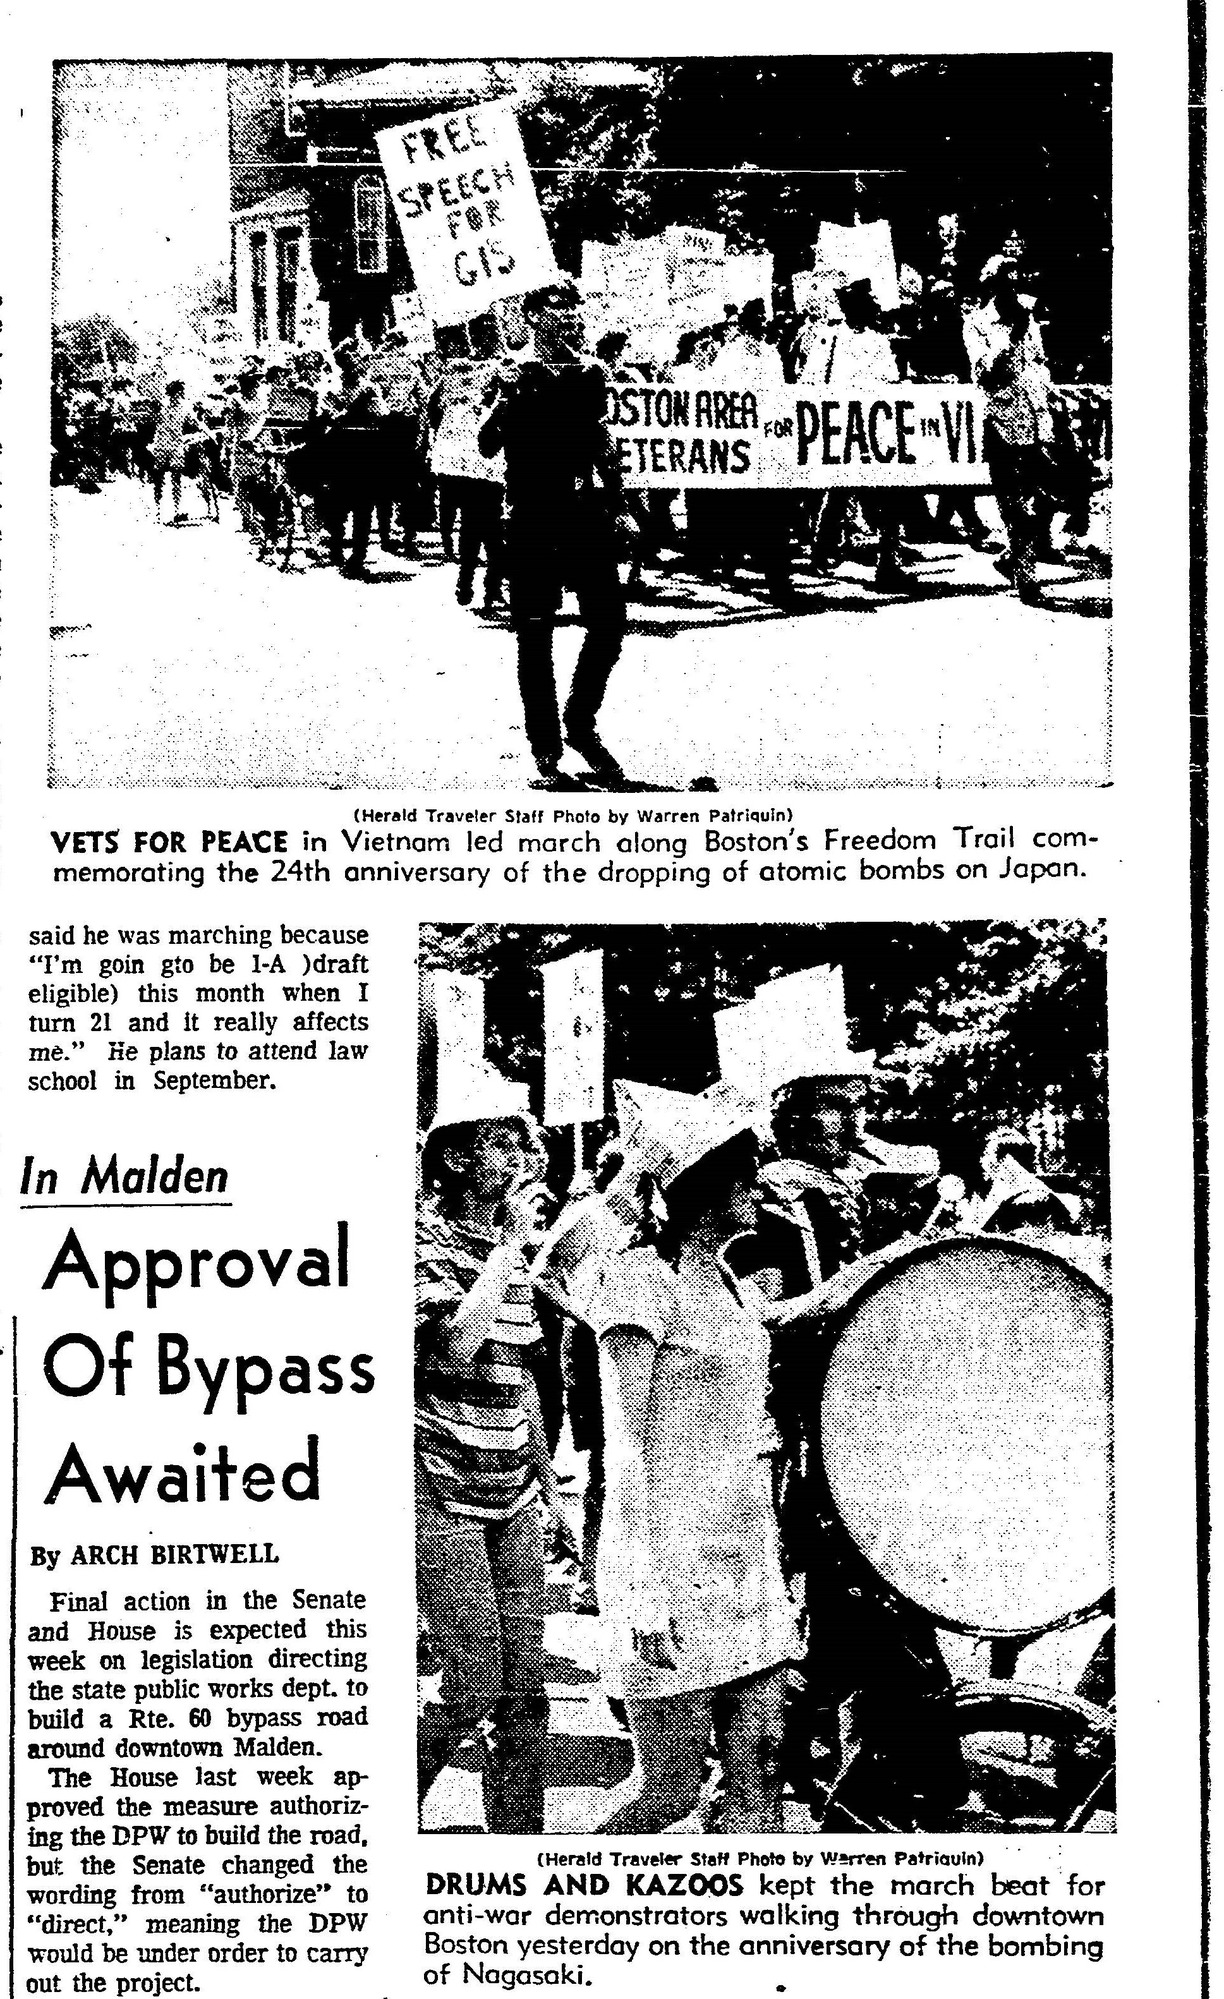 Newspaper image titled "Vets for Peace" of protestors walking the Freedom Trail. 